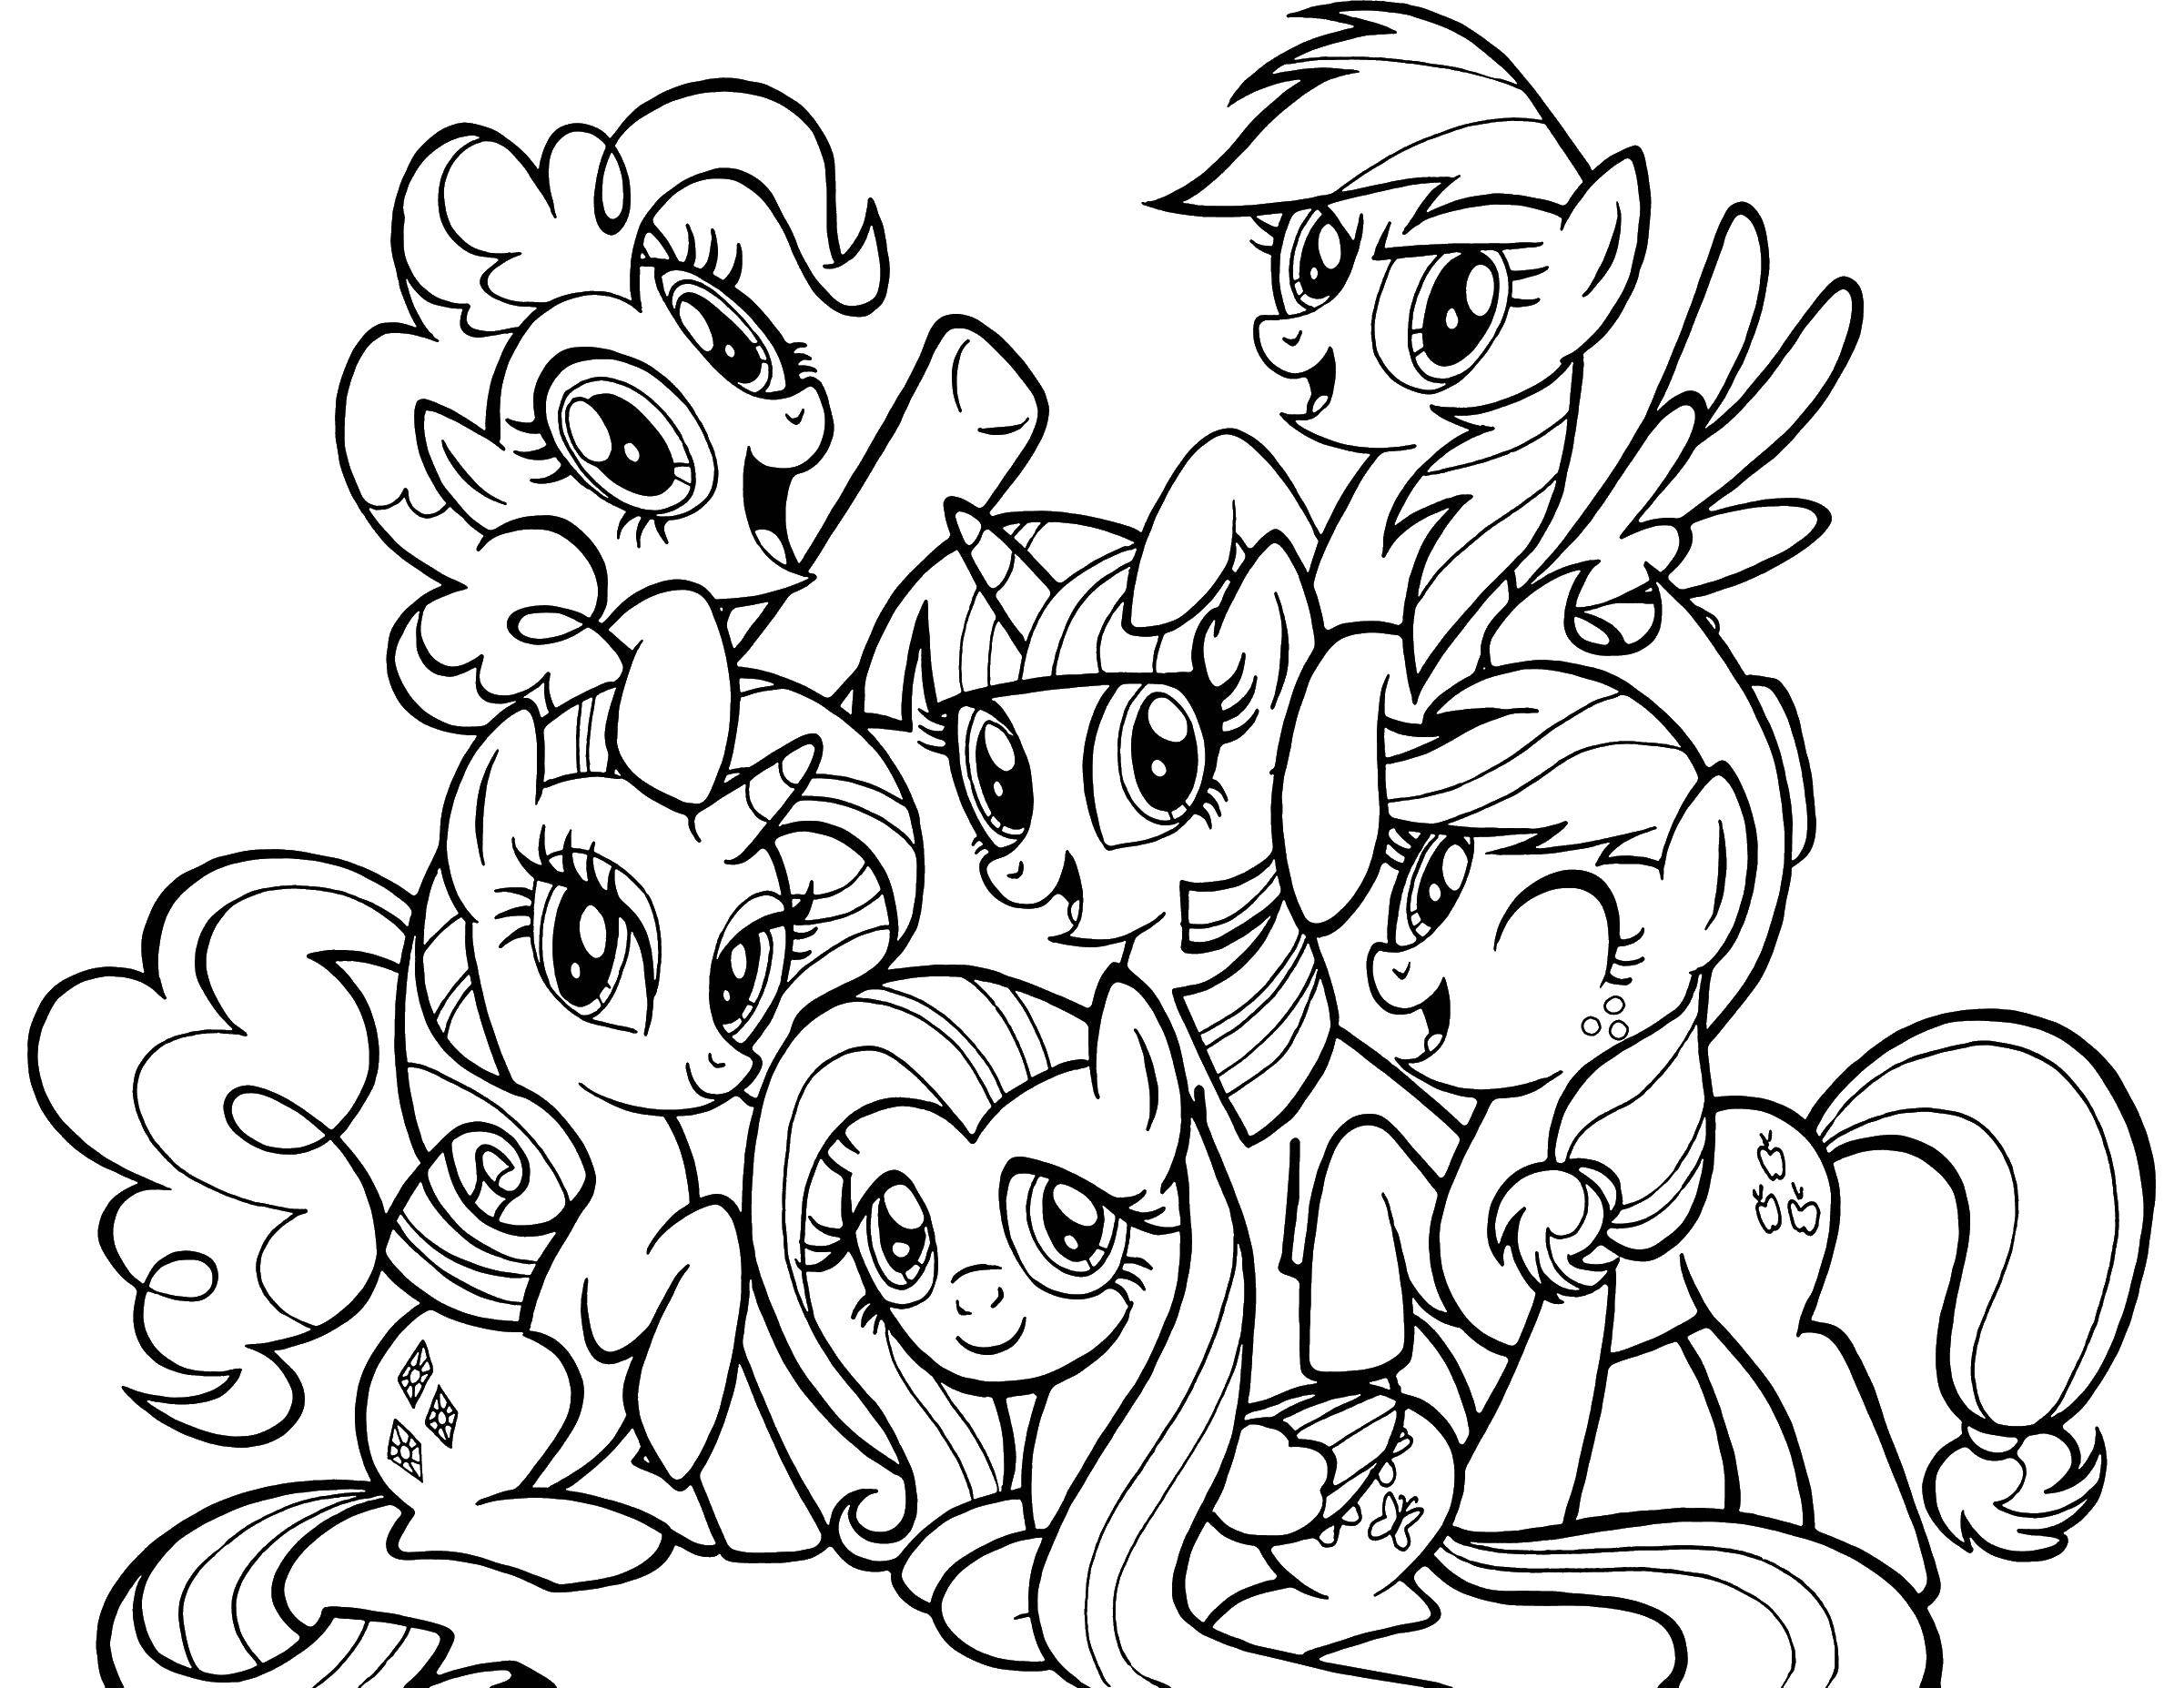 Coloring My little pony. Category Ponies. Tags:  Ponies.